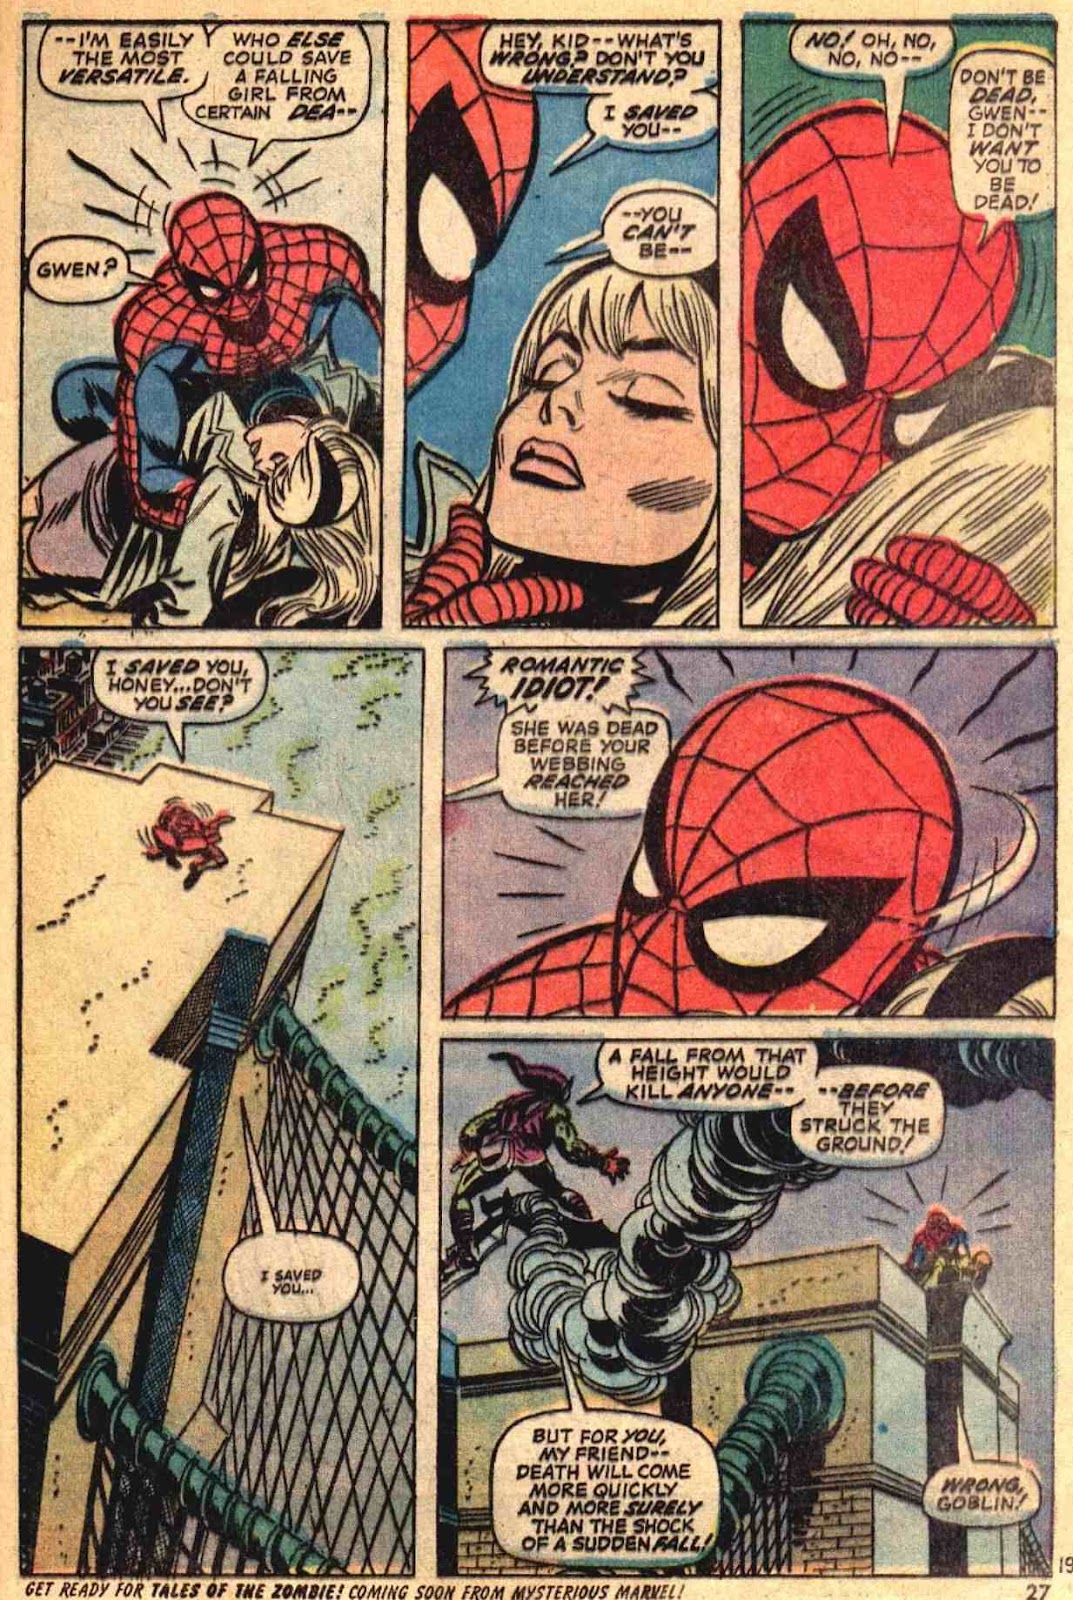 Spider-man: Death Of The Stacys Pics, Comics Collection